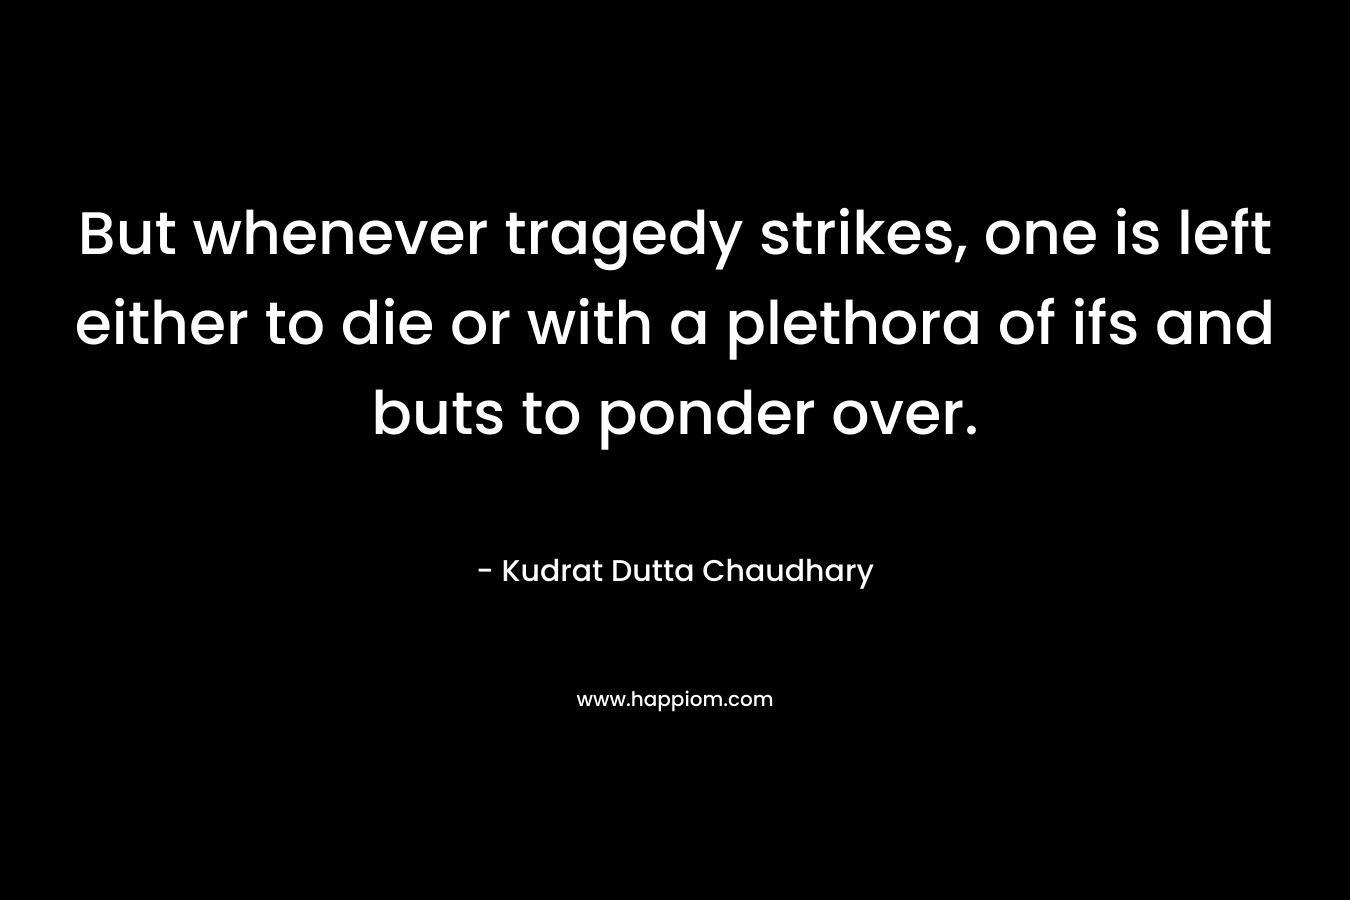 But whenever tragedy strikes, one is left either to die or with a plethora of ifs and buts to ponder over. – Kudrat Dutta Chaudhary